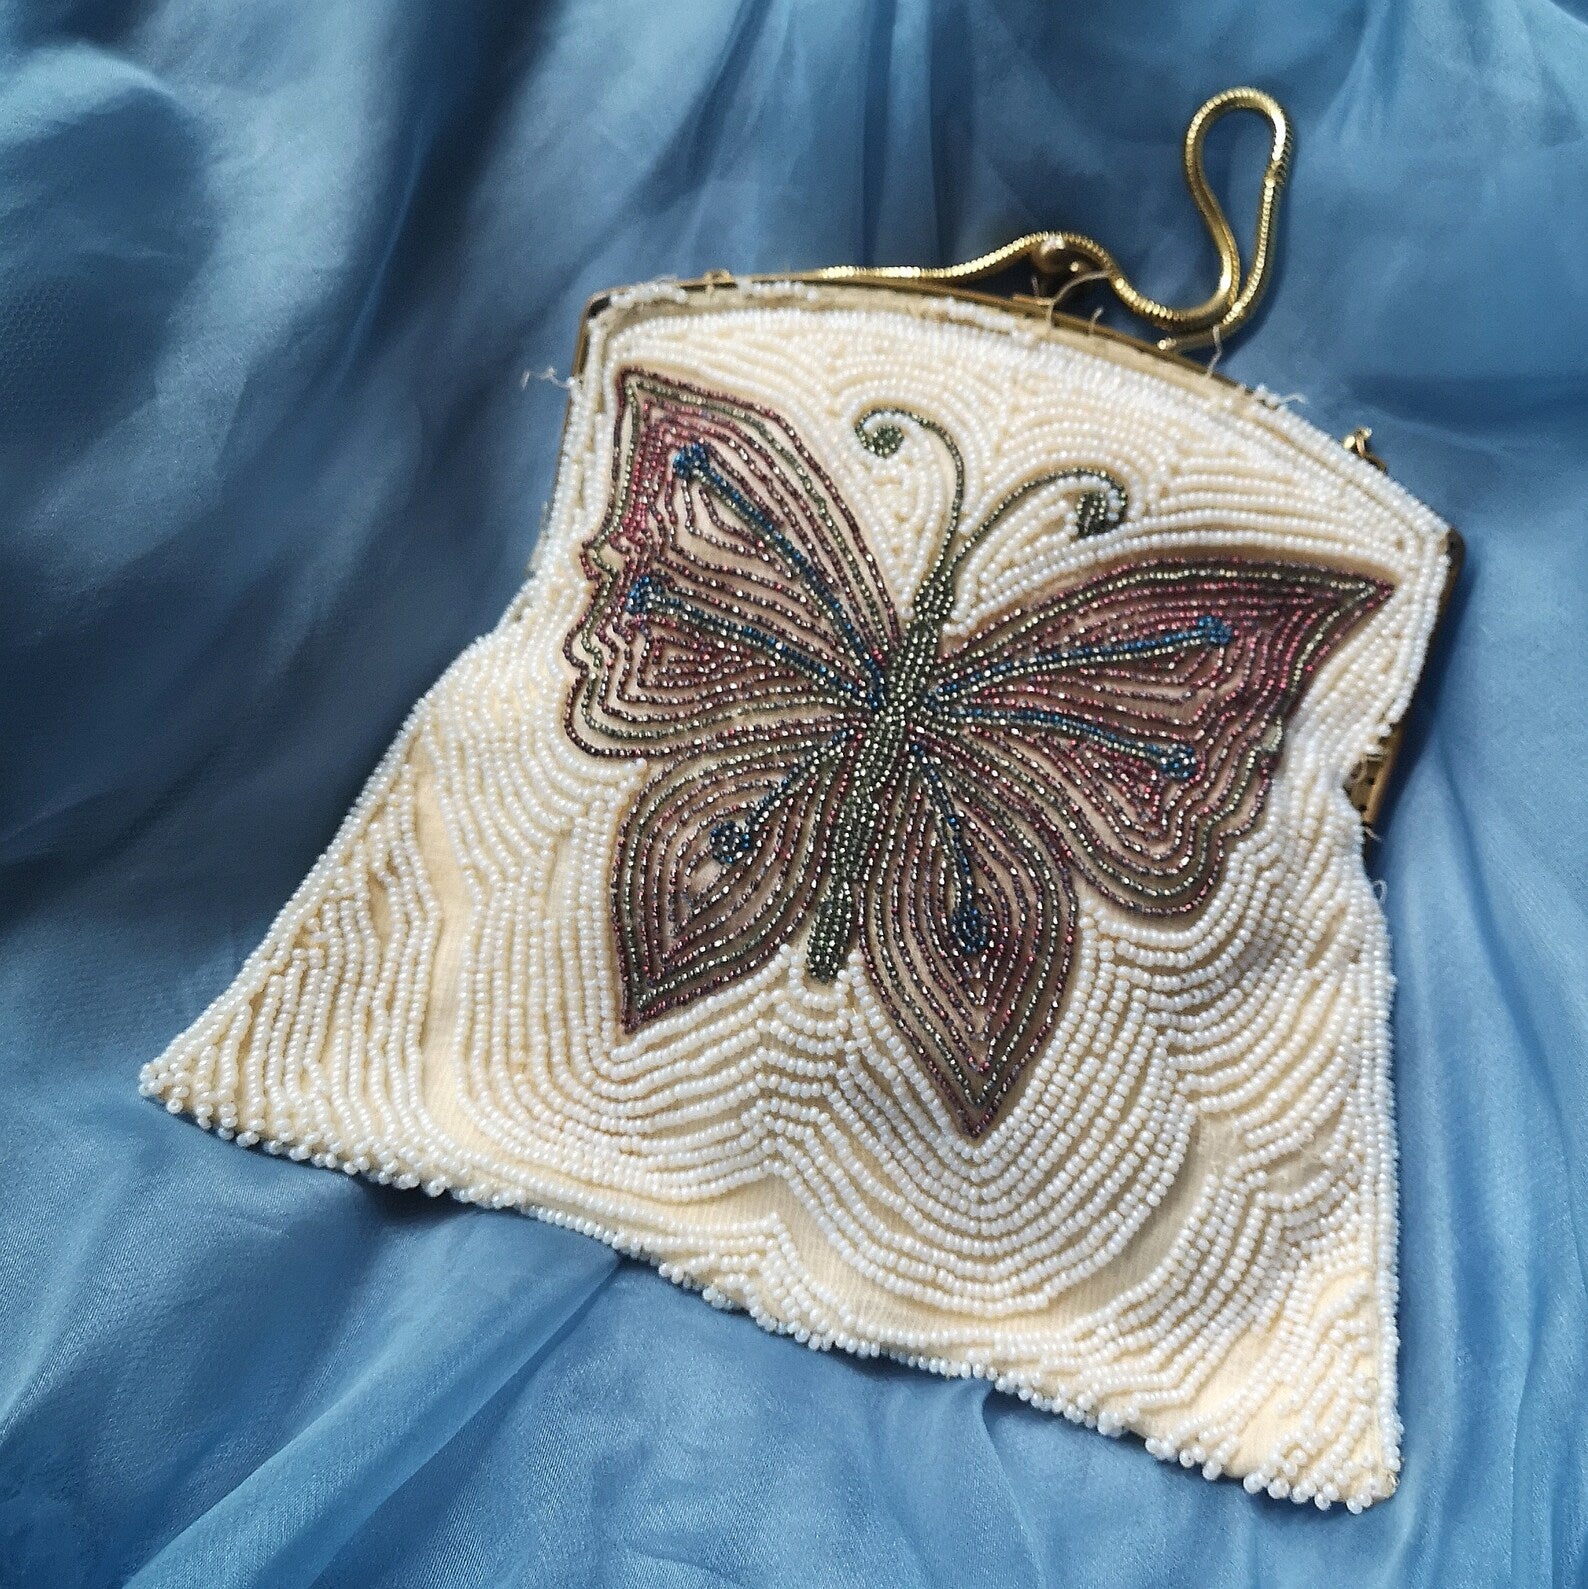 Embroidered Butterfly Bag, Handmade Butterfly Handbag, Butterfly Clutch Bag,  Embroidered Bag, Handmade Bag, Evening Bag, Unusual Bag, - Etsy